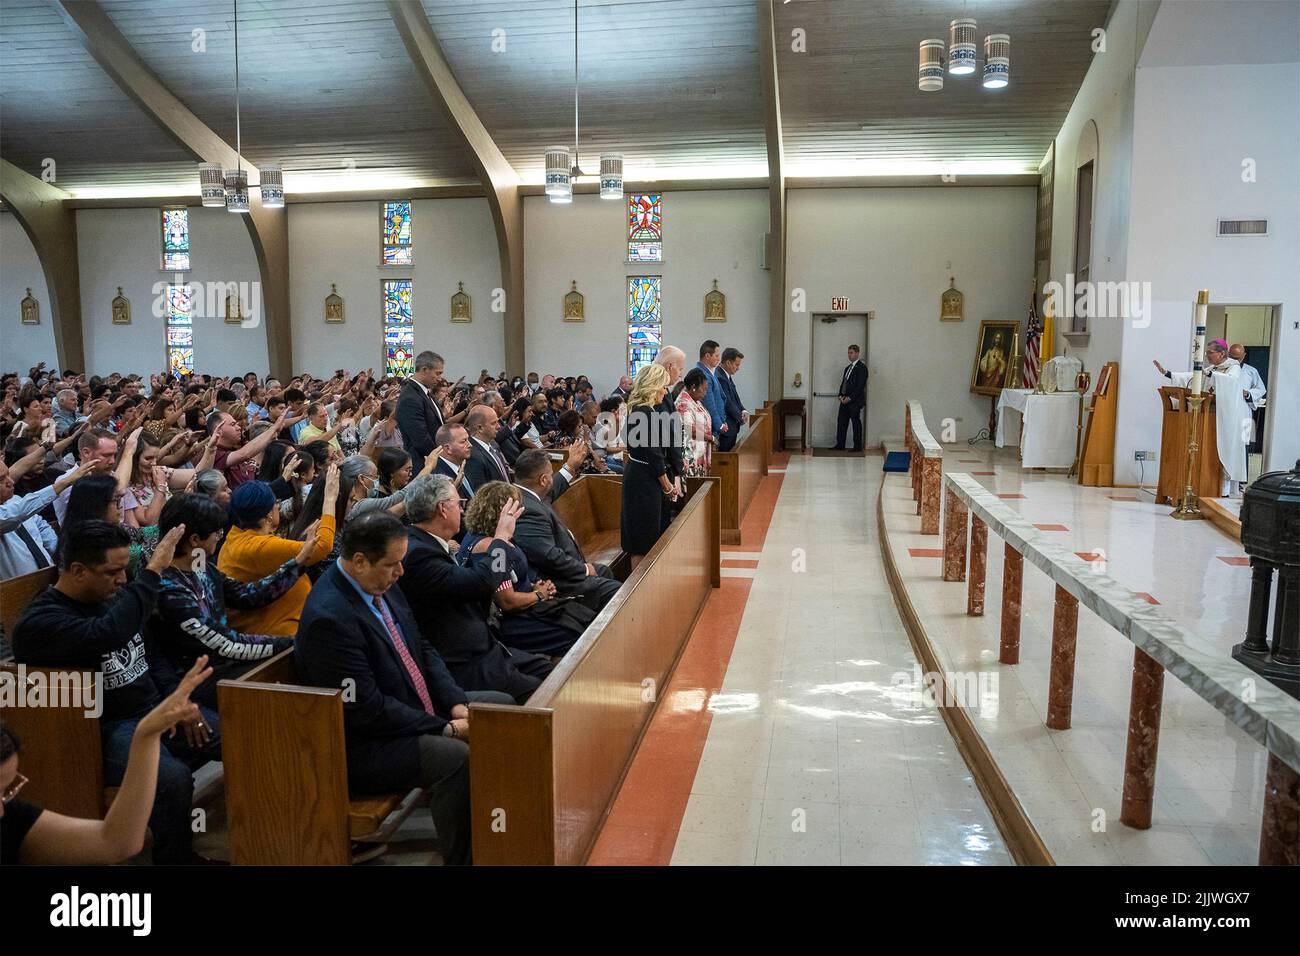 Uvalde, United States of America. 29 May, 2022. U.S President Joe Biden and first lady Dr. Jill Biden attend a mass at Sacred Heart Catholic for the children killed at Church Robb Elementary School, May 29, 2022 in Uvalde, Texas. The school is the site where a gunman slaughtered 19 students and two teachers with a military style assault rifle.  Credit: Adam Schultz/White House Photo/Alamy Live News Stock Photo